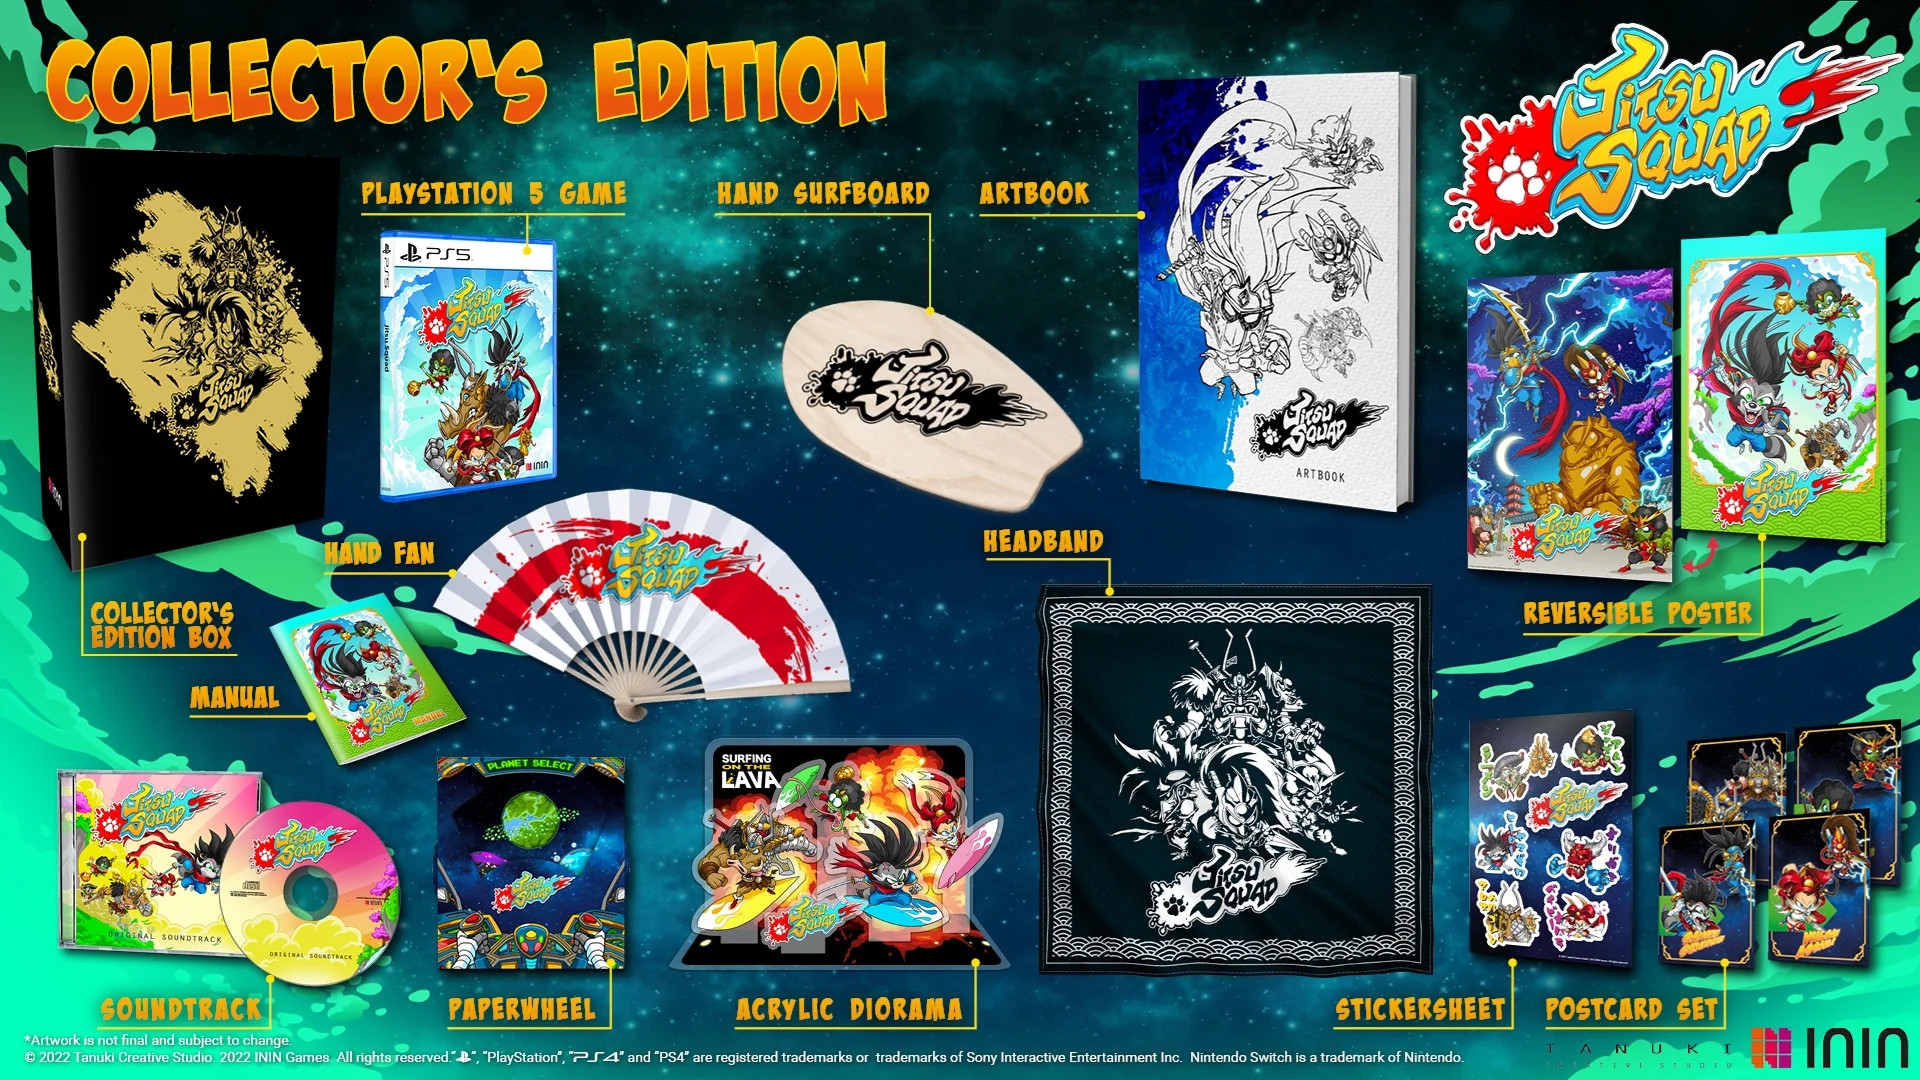 Jitsu Squad - Collector's Edition (Strictly Limited) (PS5), Inin Games